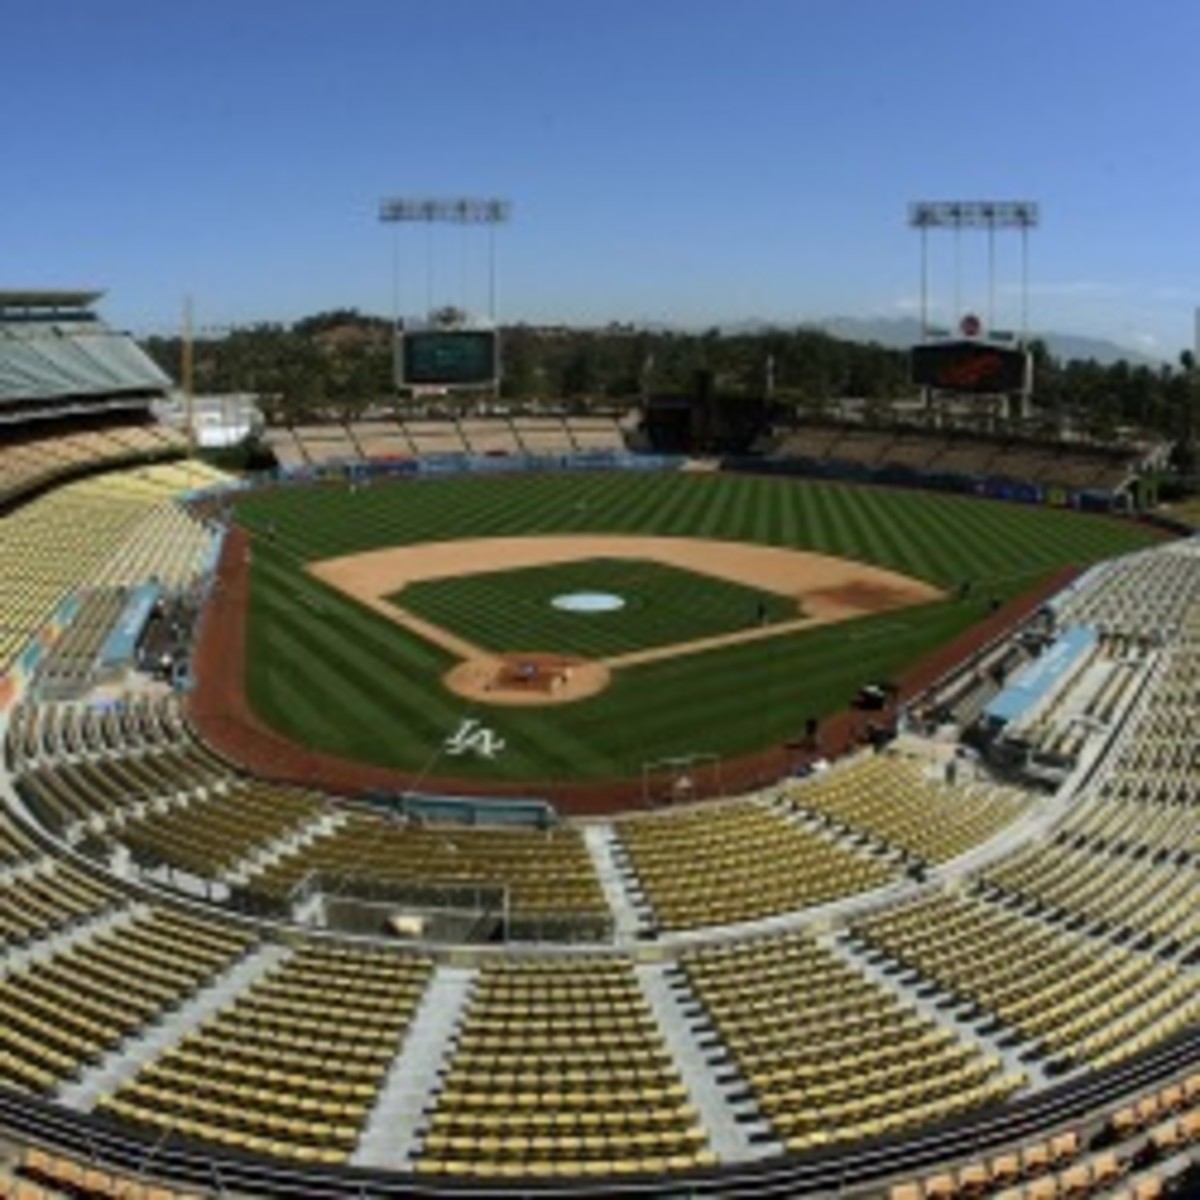 Iconic Dodger Stadium will host an outdoor NHL game in January. (Jeff Golden/Getty Images)